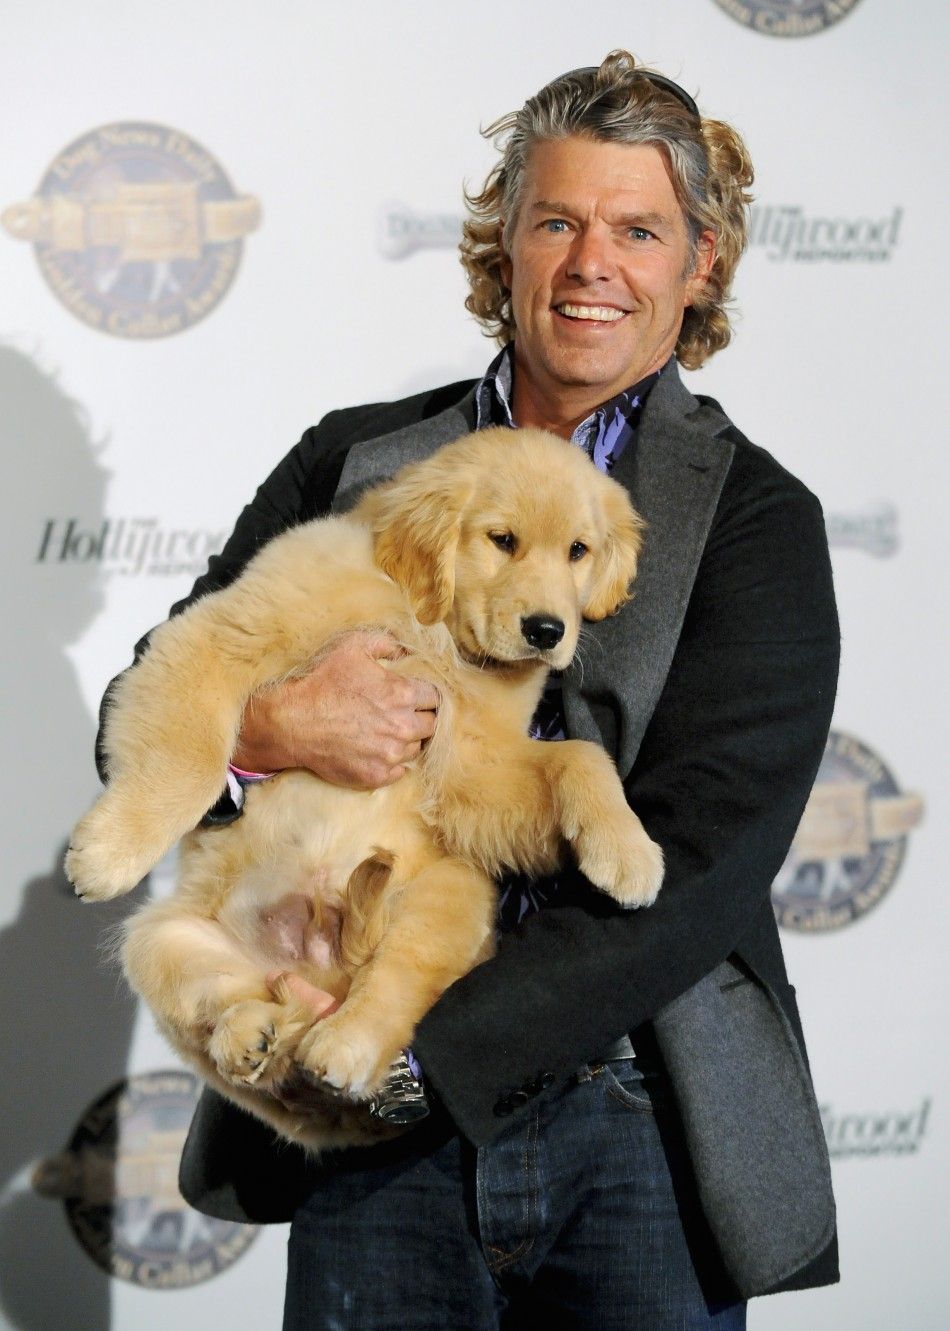 Director Robert Vince along with B-Dawg arrive at the first annual Golden Collar Awards celebrating Hollywoods most talented canine thespians from Oscar nominated films and Emmy Award winning television shows in Los Angeles, California 